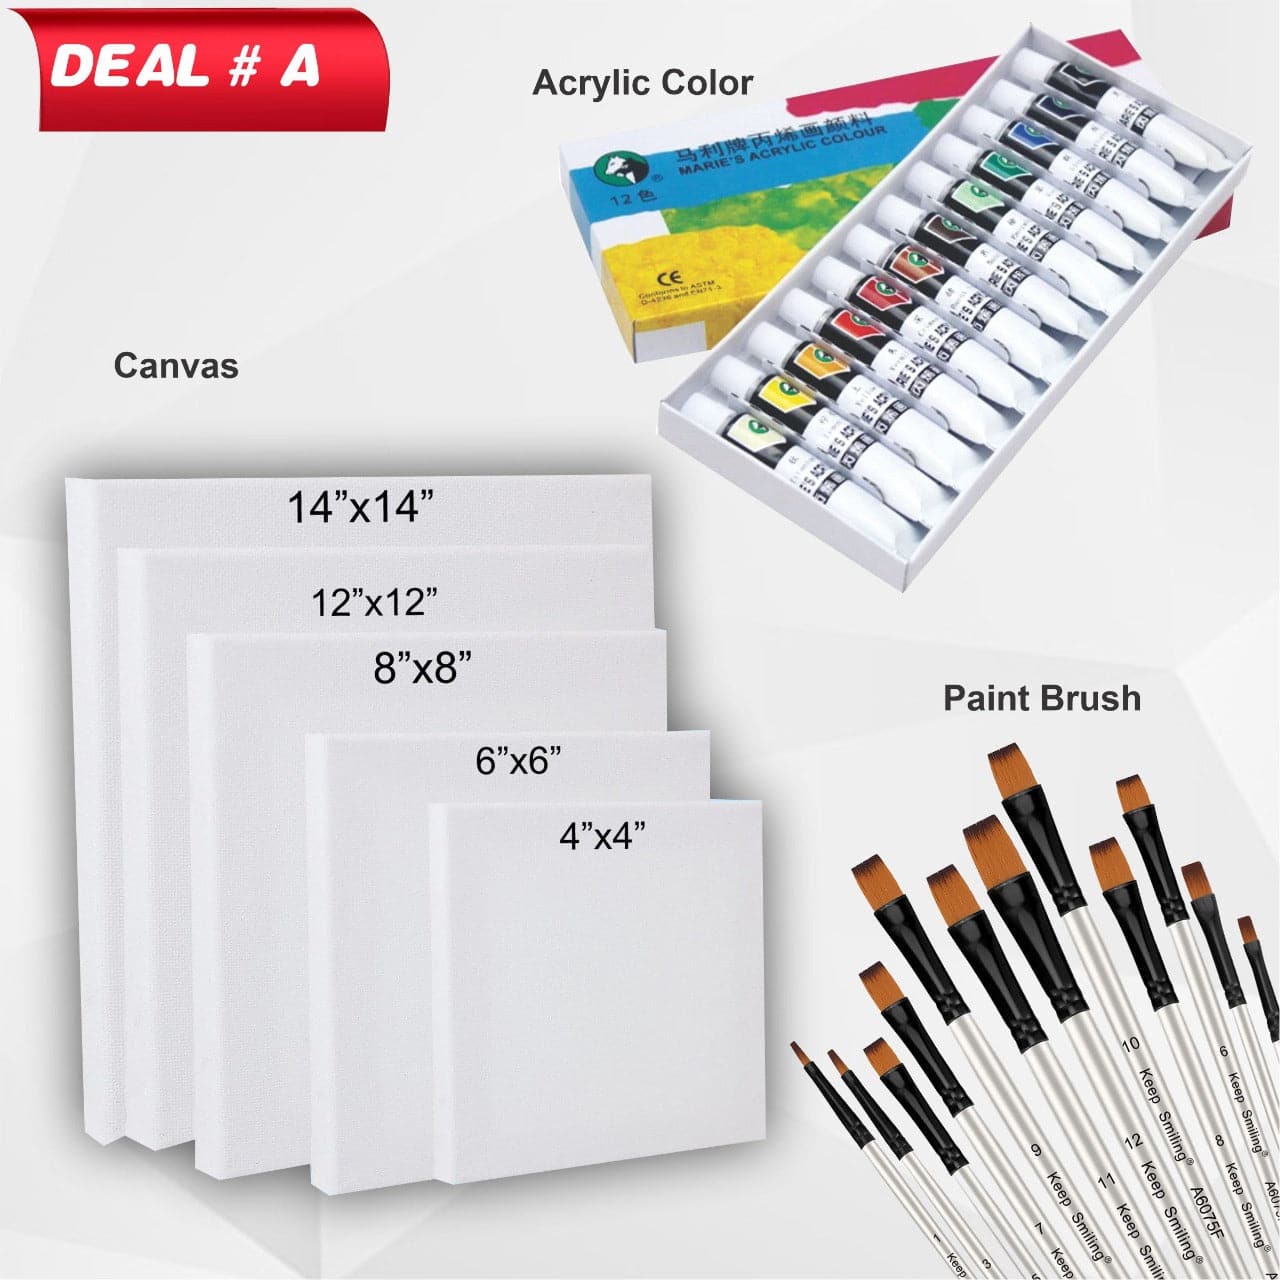 online stationery shop lahore